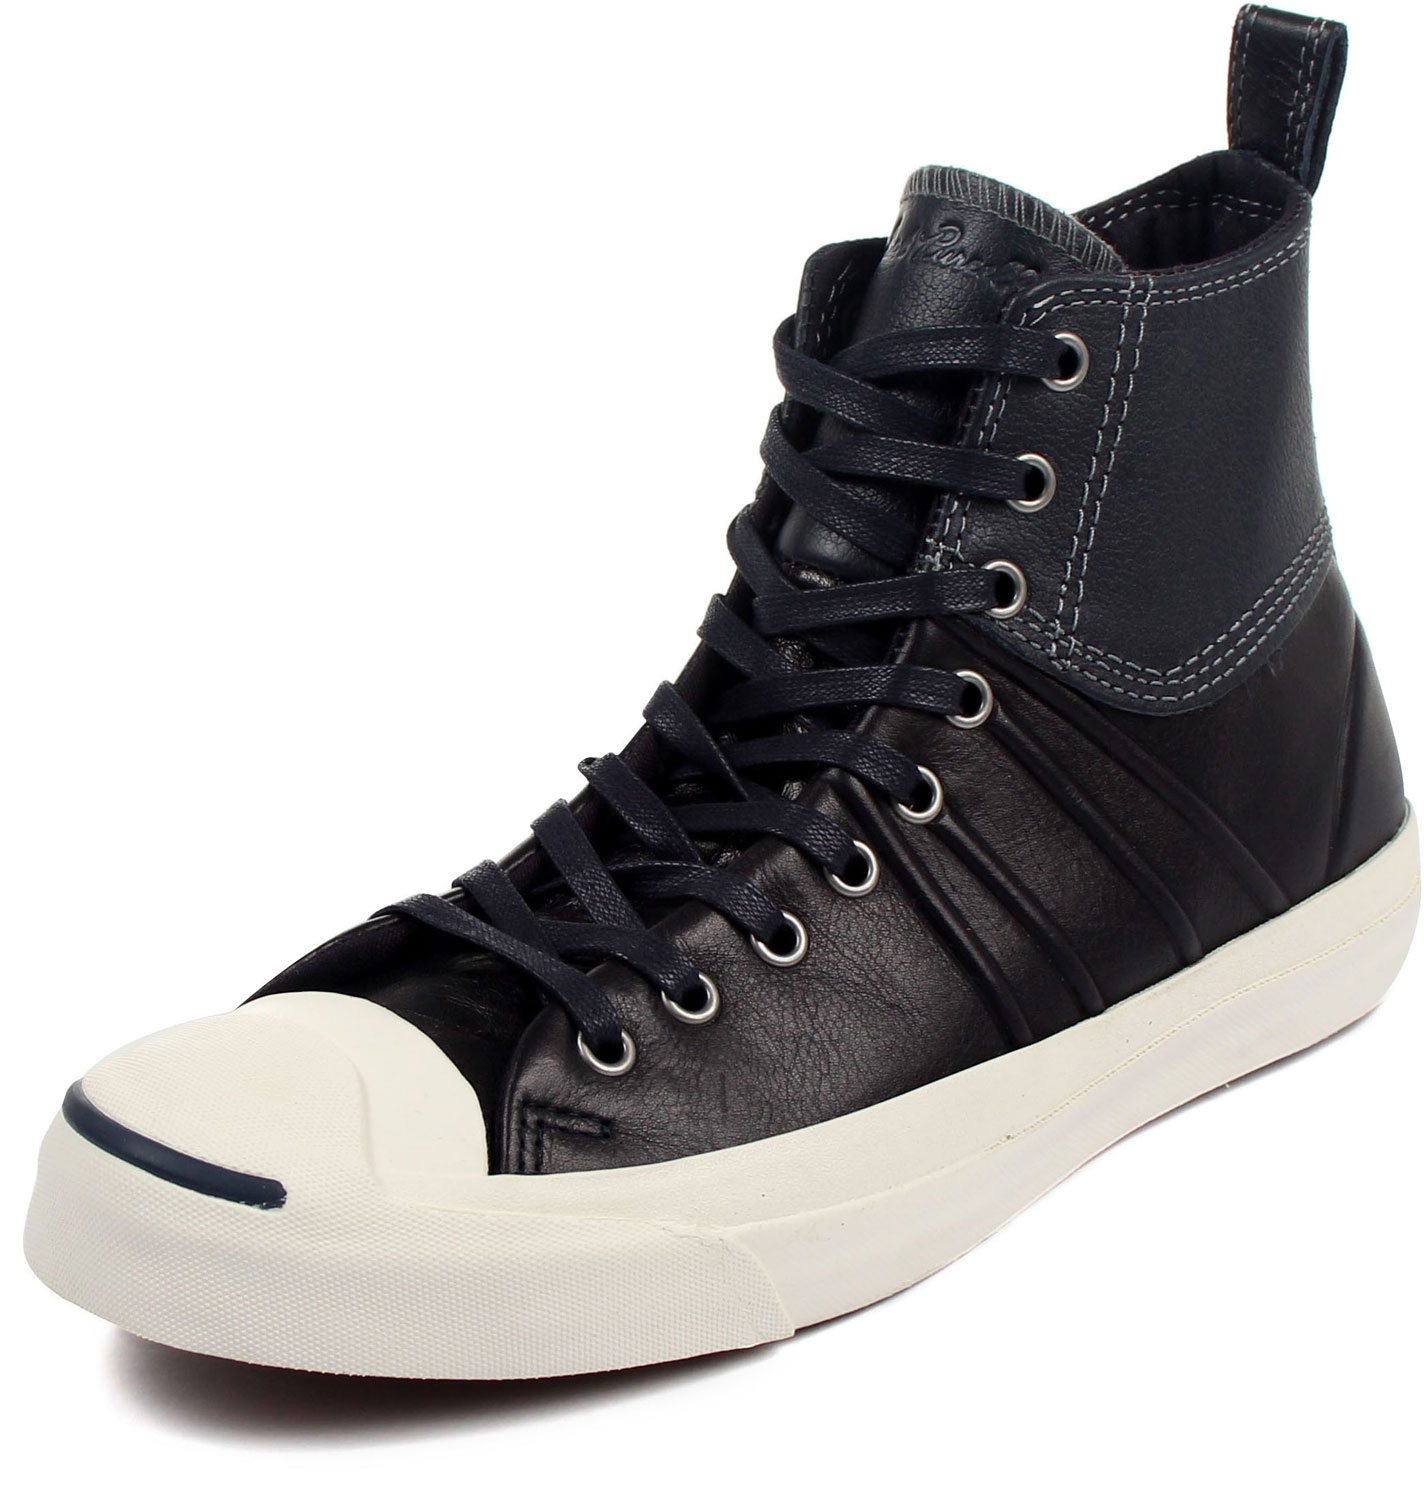 Converse - Mid Jack Purcell Duck Shoes